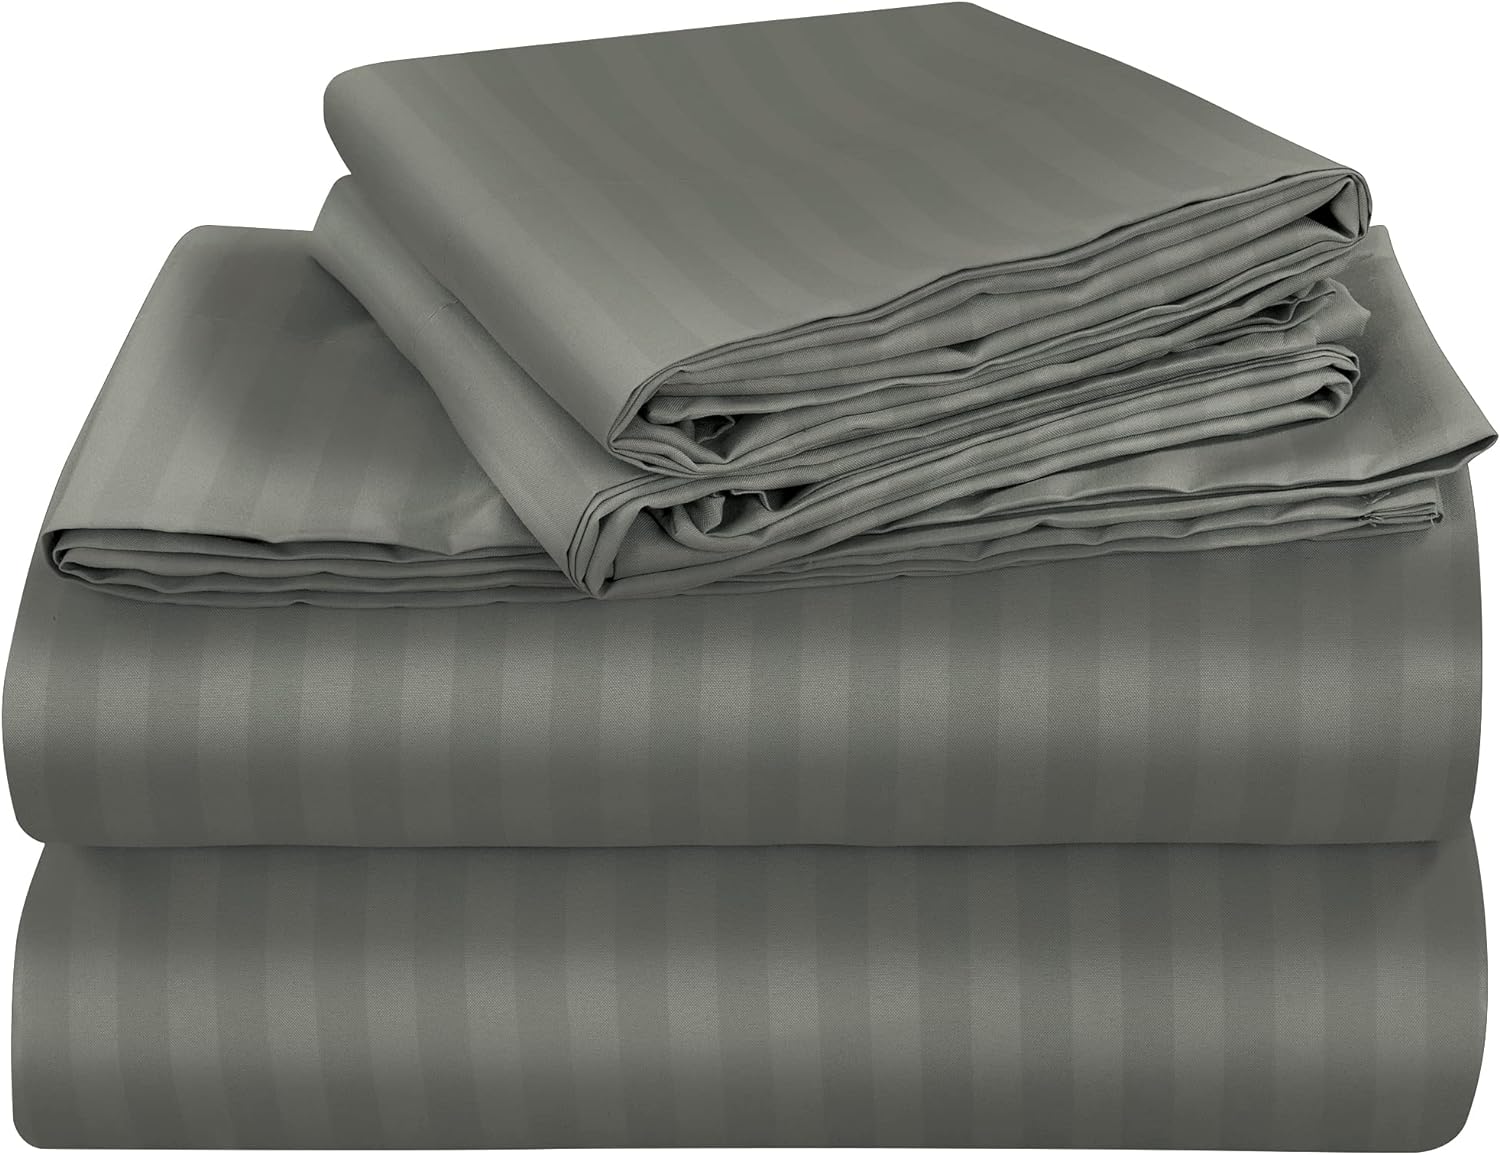 ROYALE LINENS Striped Bed Sheet Set - Brushed Microfiber 1800 Bedding - 1 Fitted Sheet, 1 Flat Sheet, 2 Pillow Case - Wrinkle & Fade Resistant - 4 Piece Damask Stripe Queen Bed Sheet Set (Queen, Grey)